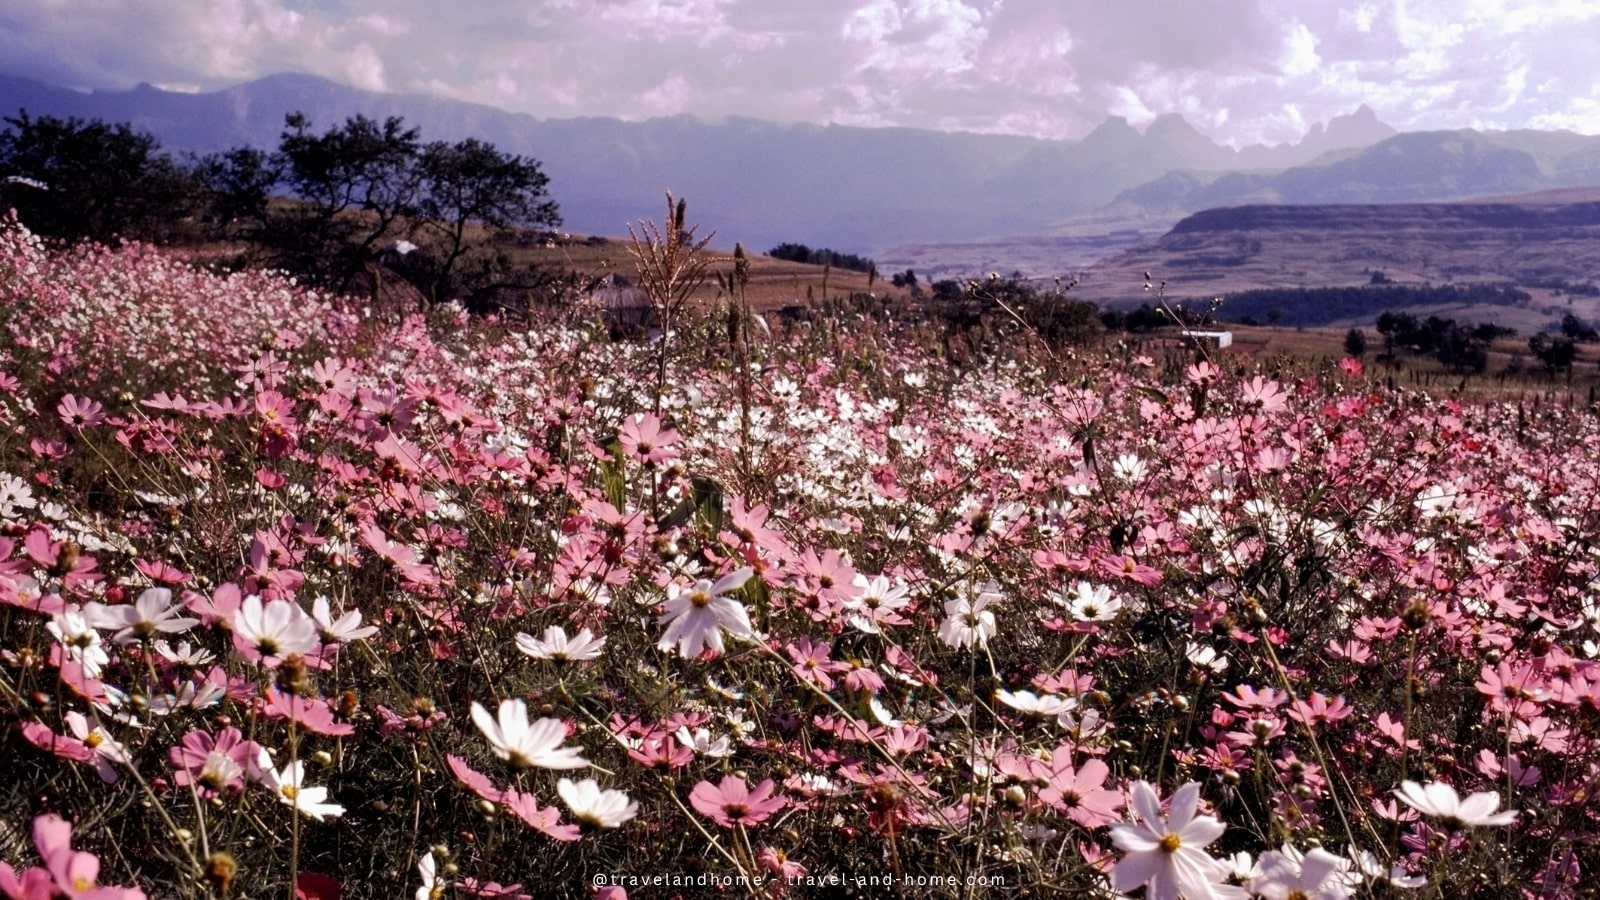 Drakensberg Cosmos flowers April Hiking Best hikes trails South Africa min